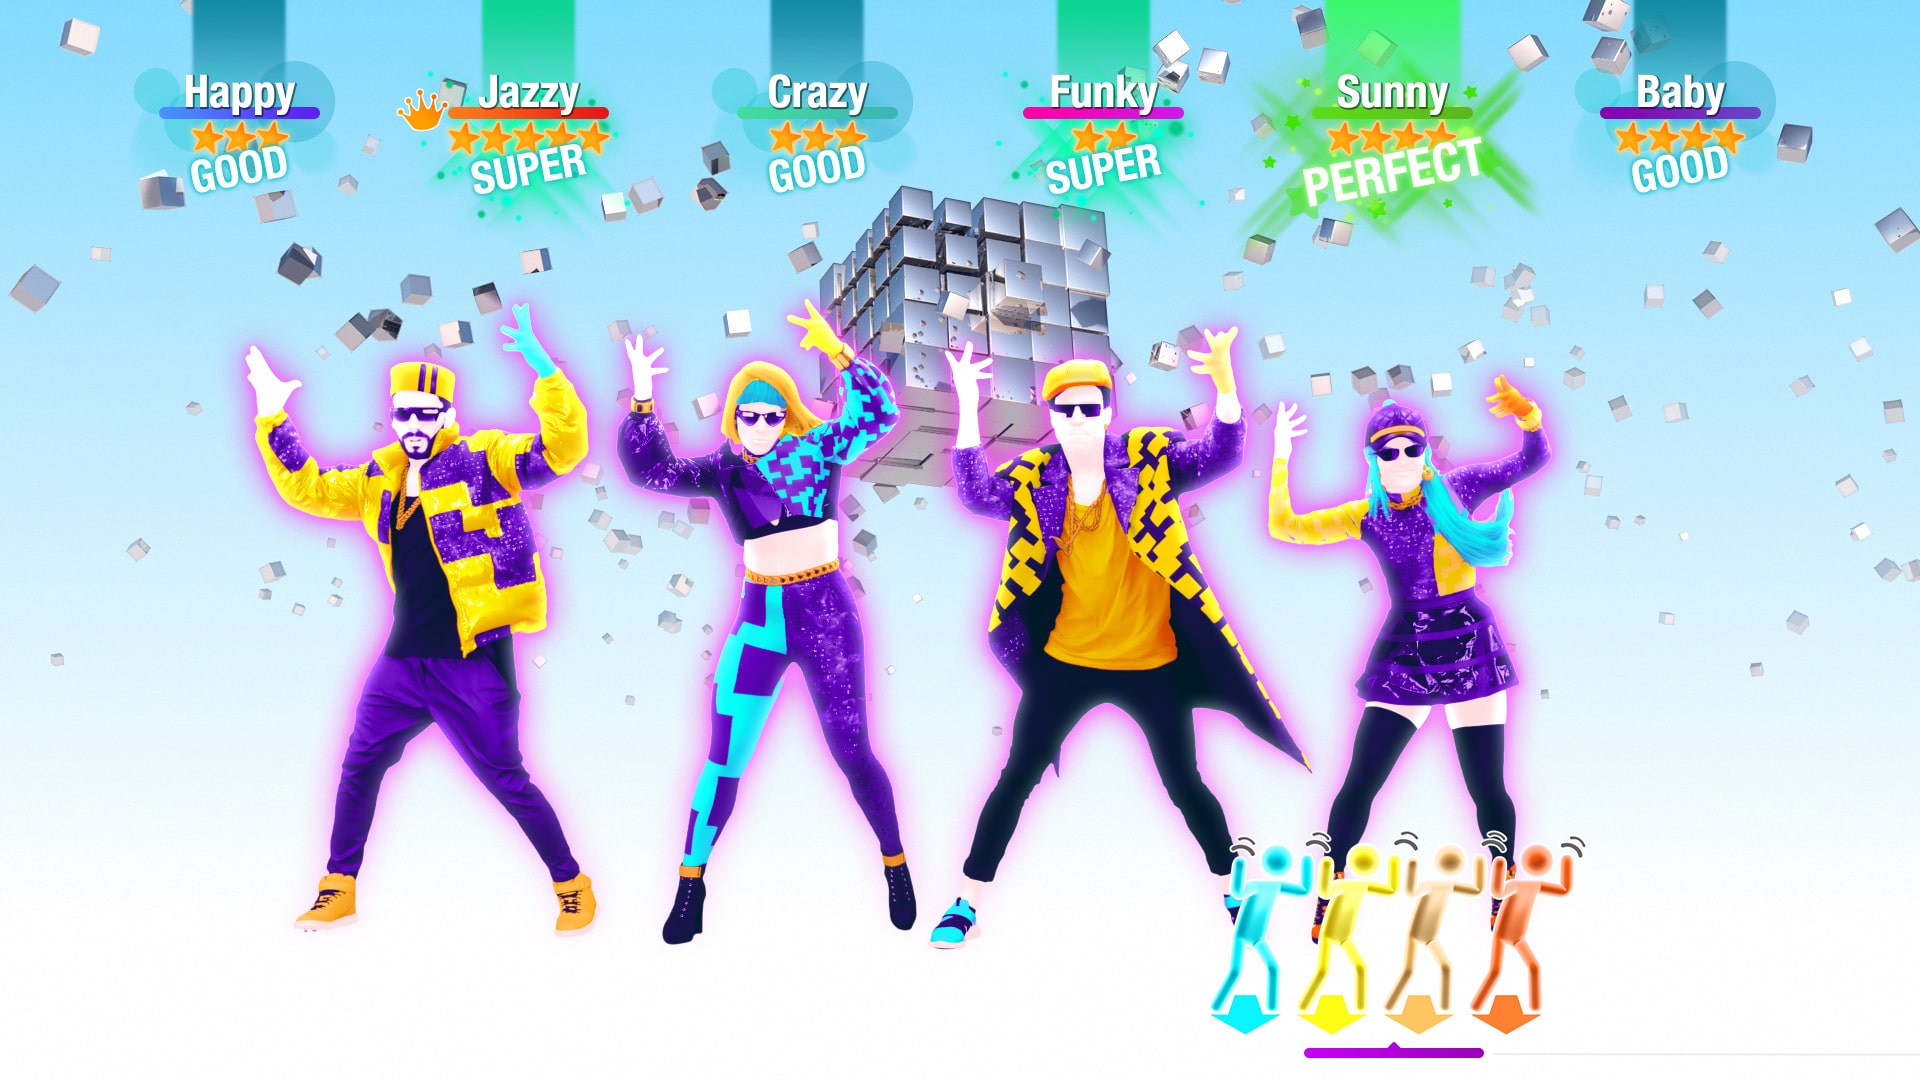 just dance ps4 price